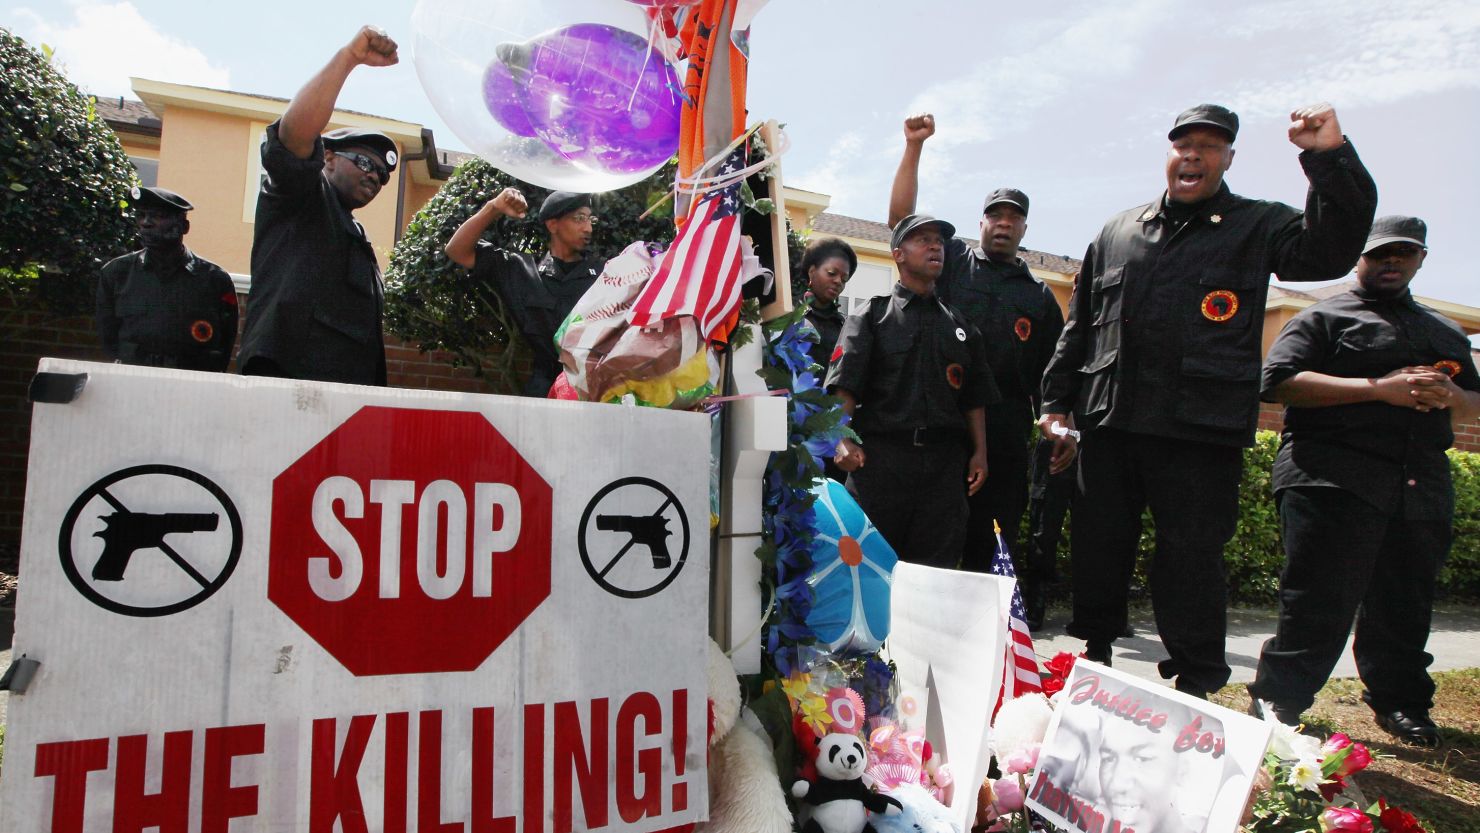 The New Black Panther party has offered a $10,000 bounty for George Zimmerman's capture.